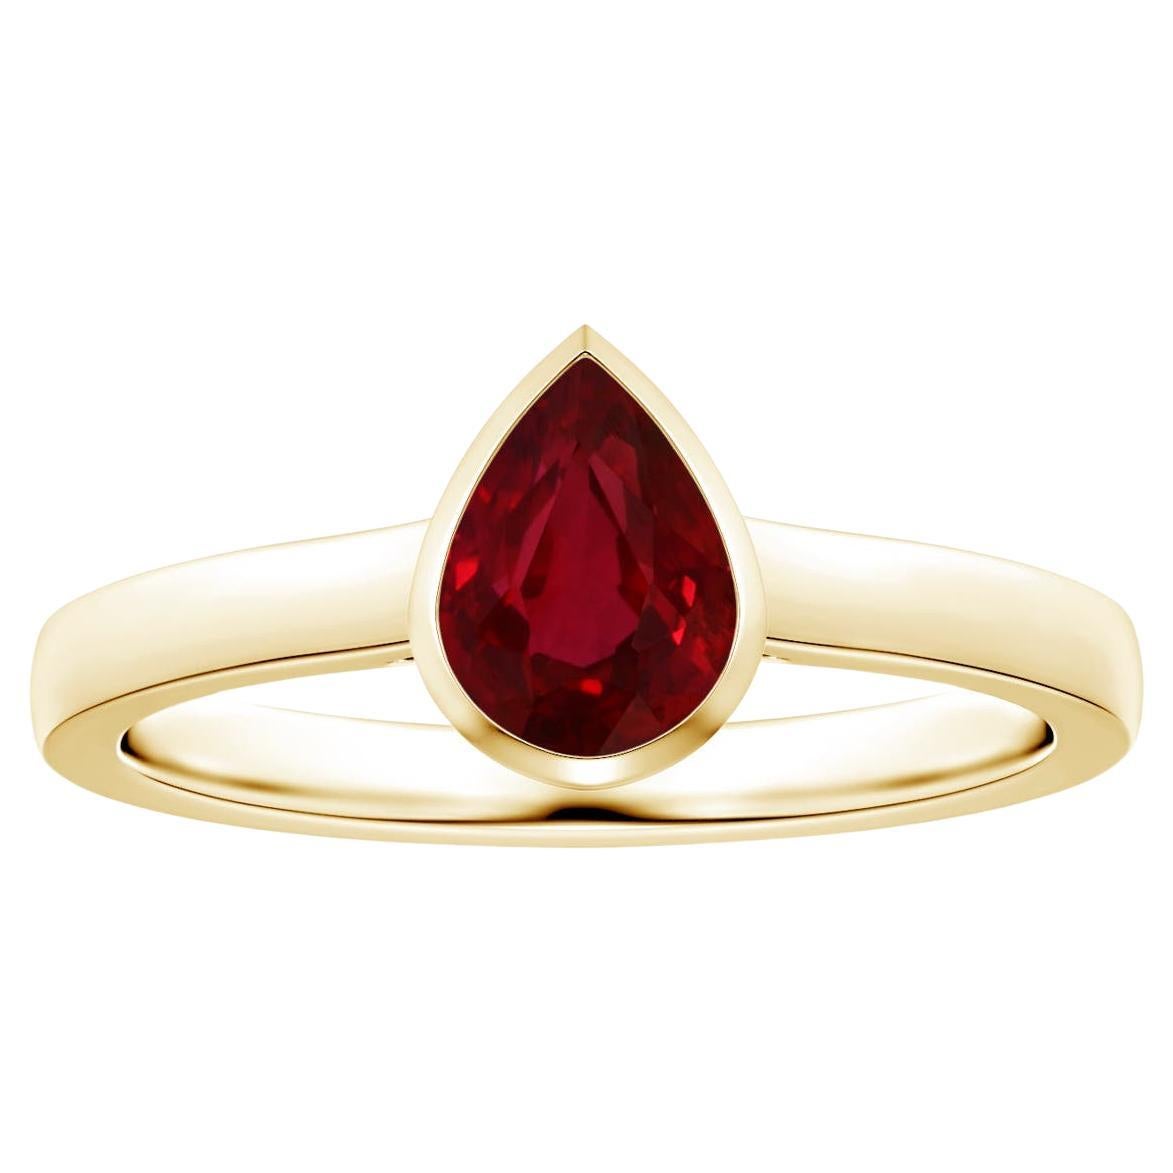 For Sale:  ANGARA Bezel-Set GIA Certified Pear-Shaped Ruby Solitaire Ring in Yellow Gold